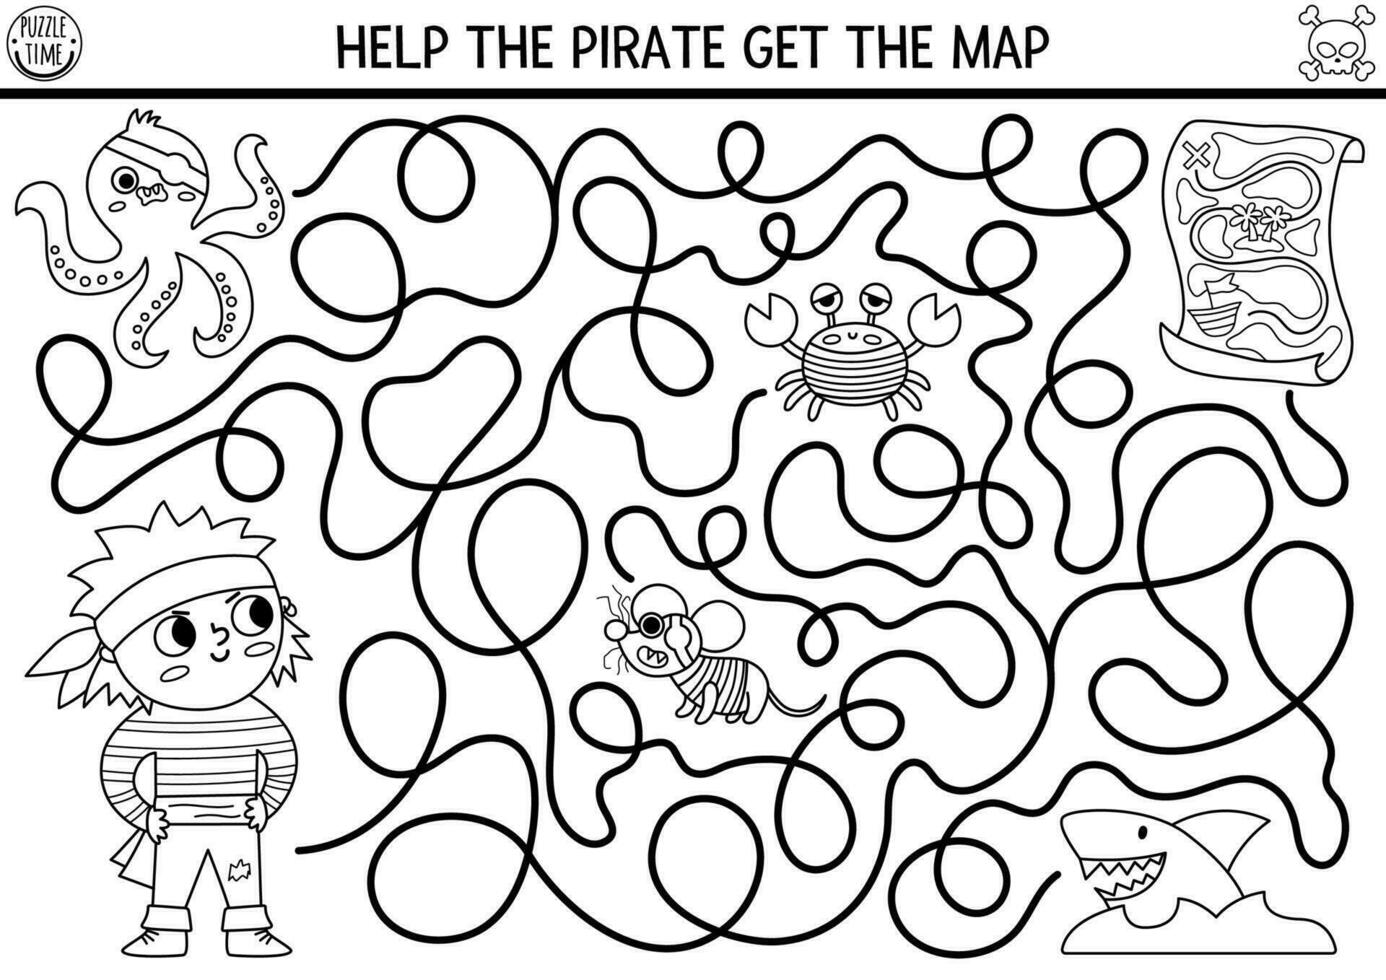 Pirate black and white maze for kids. Treasure hunt preschool printable activity with cute raider captain, octopus, rat, shark, crab. Sea adventures coloring labyrinth game. Help pirate get map vector